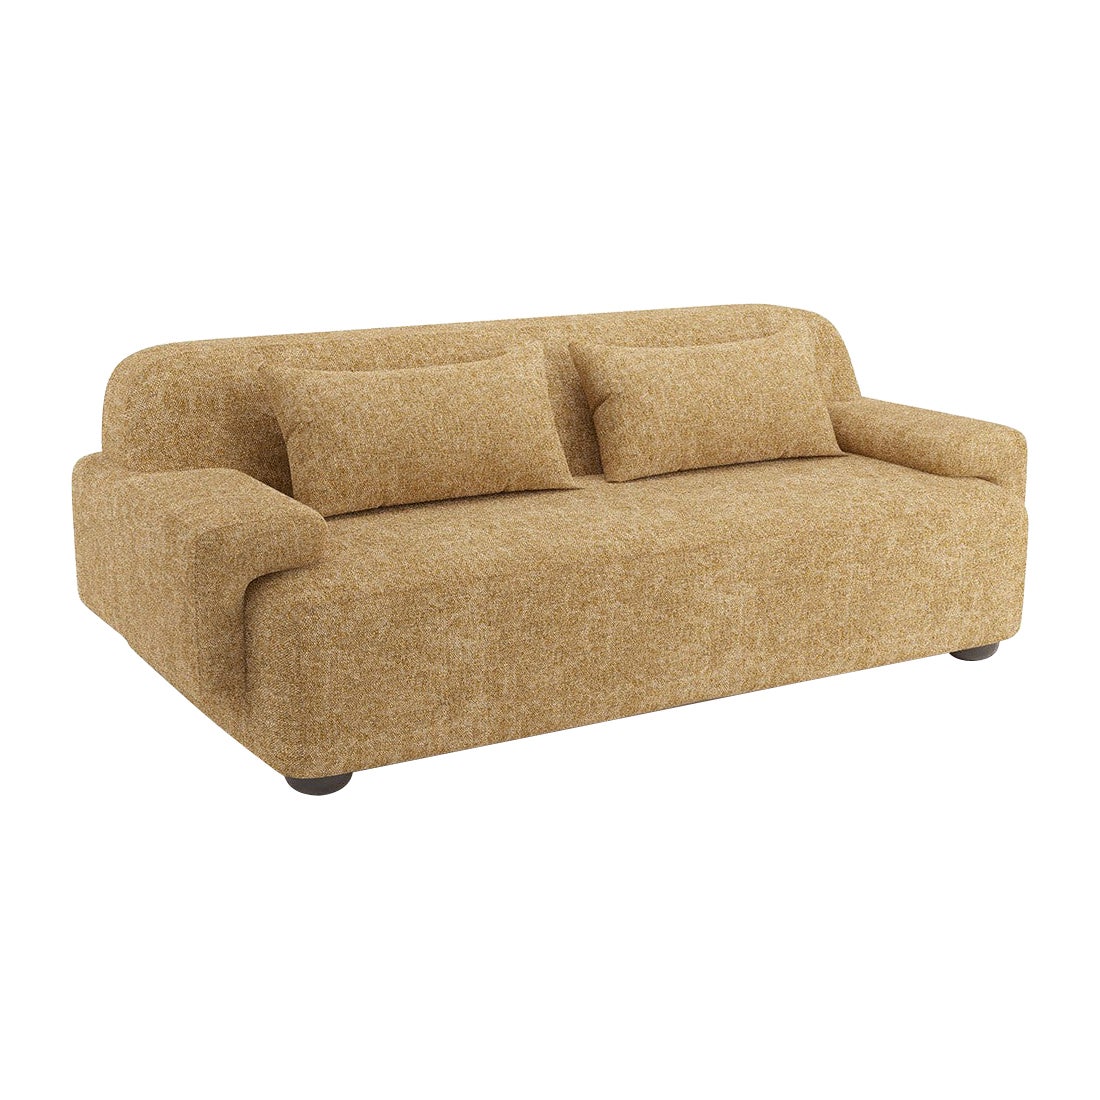 Popus Editions Lena 2.5 Seater Sofa in Ocher London Linen Fabric For Sale